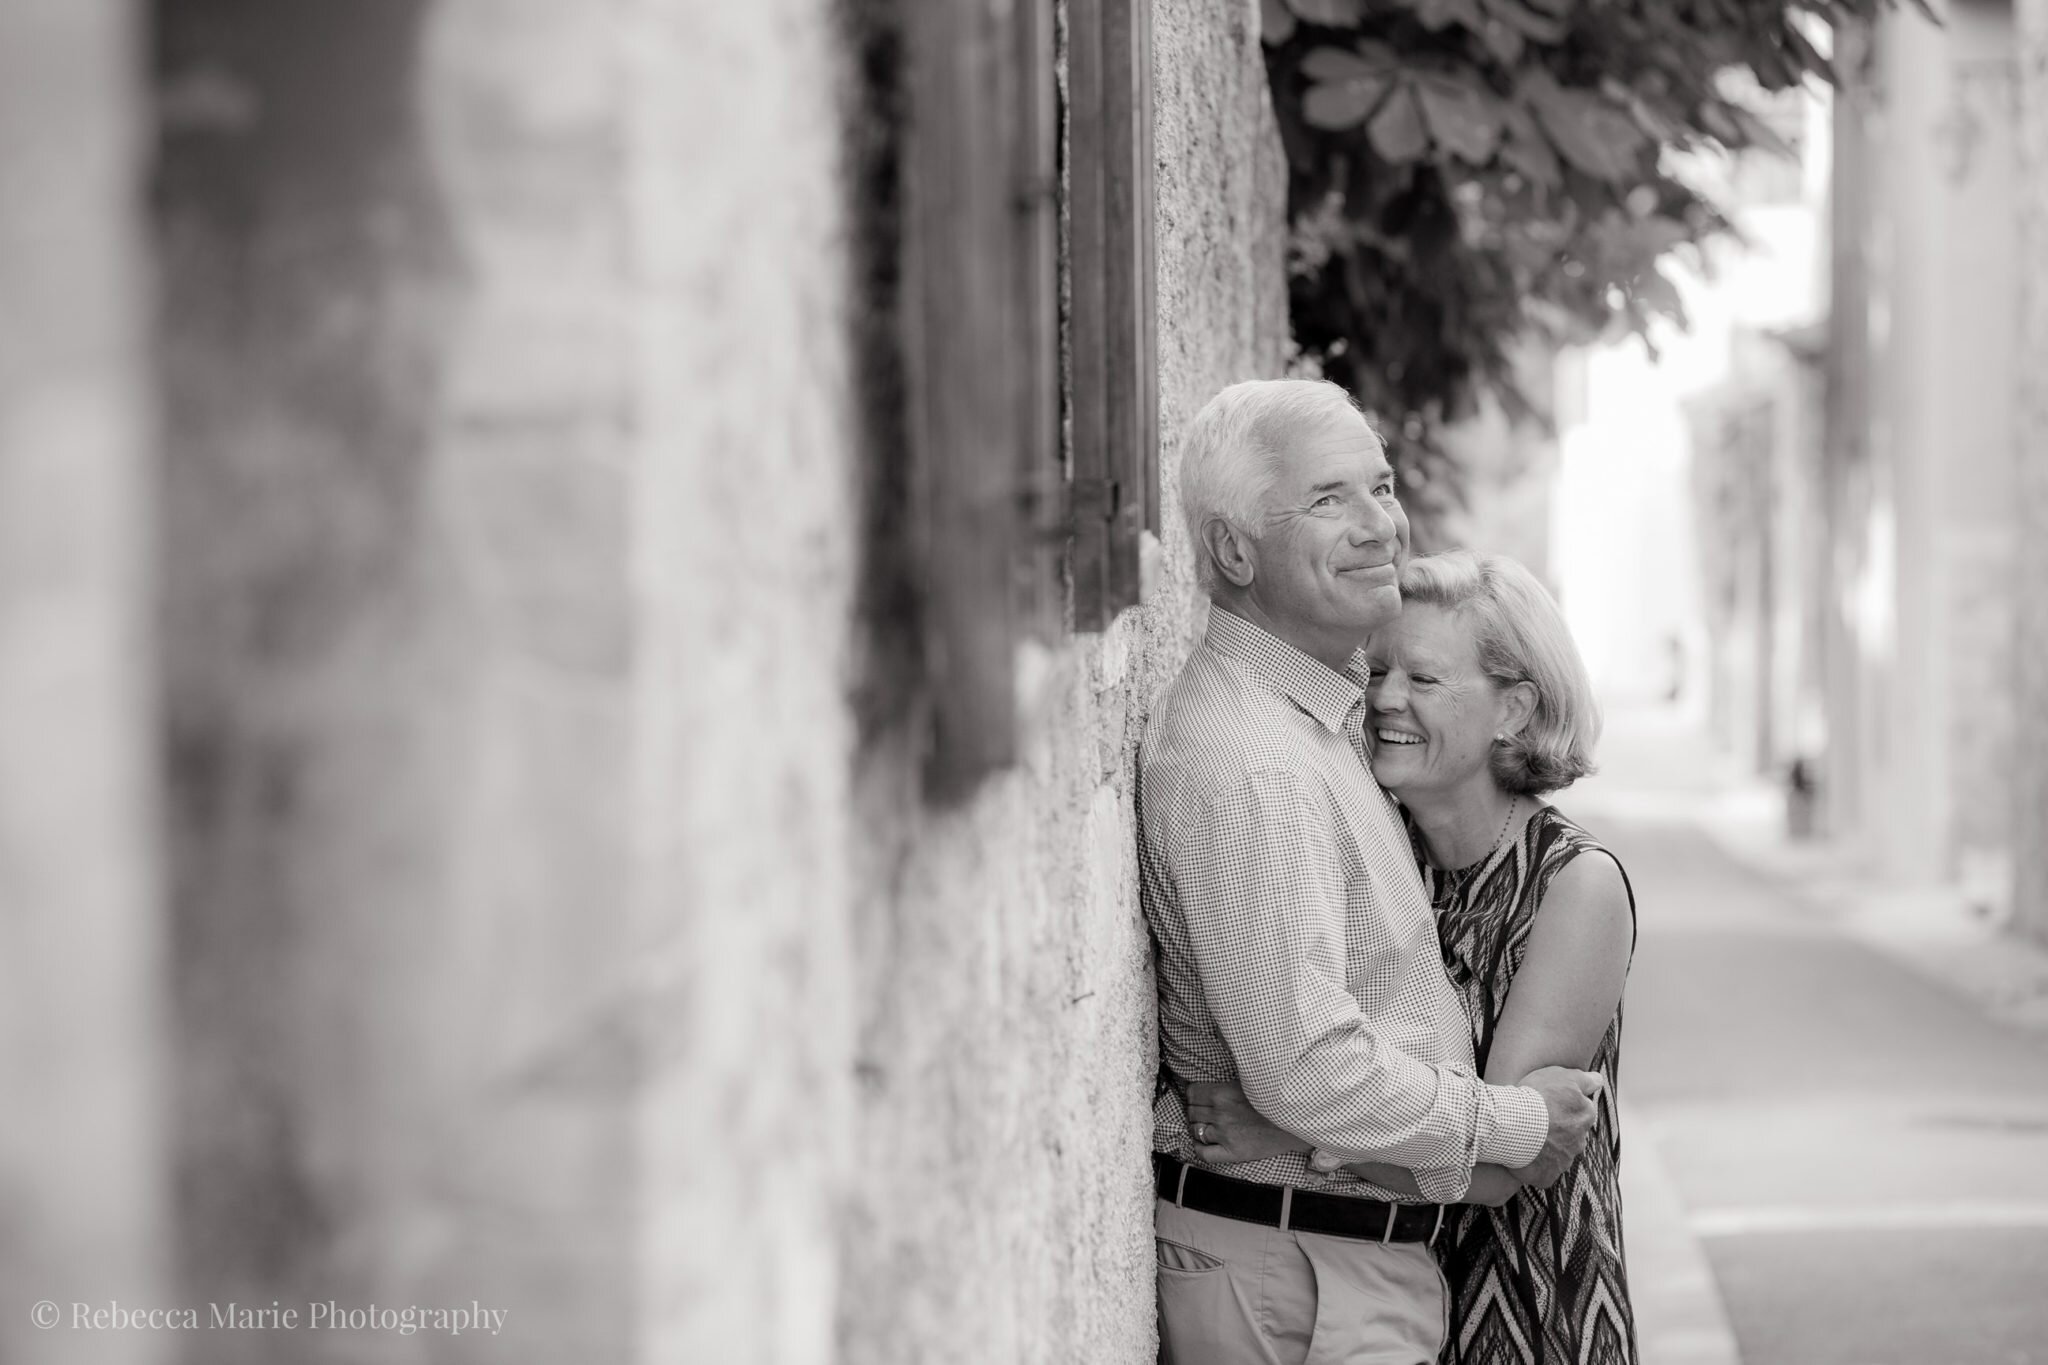 Portraits-in-France-Valbonne-Rebecca-Marie-Photography-10-1